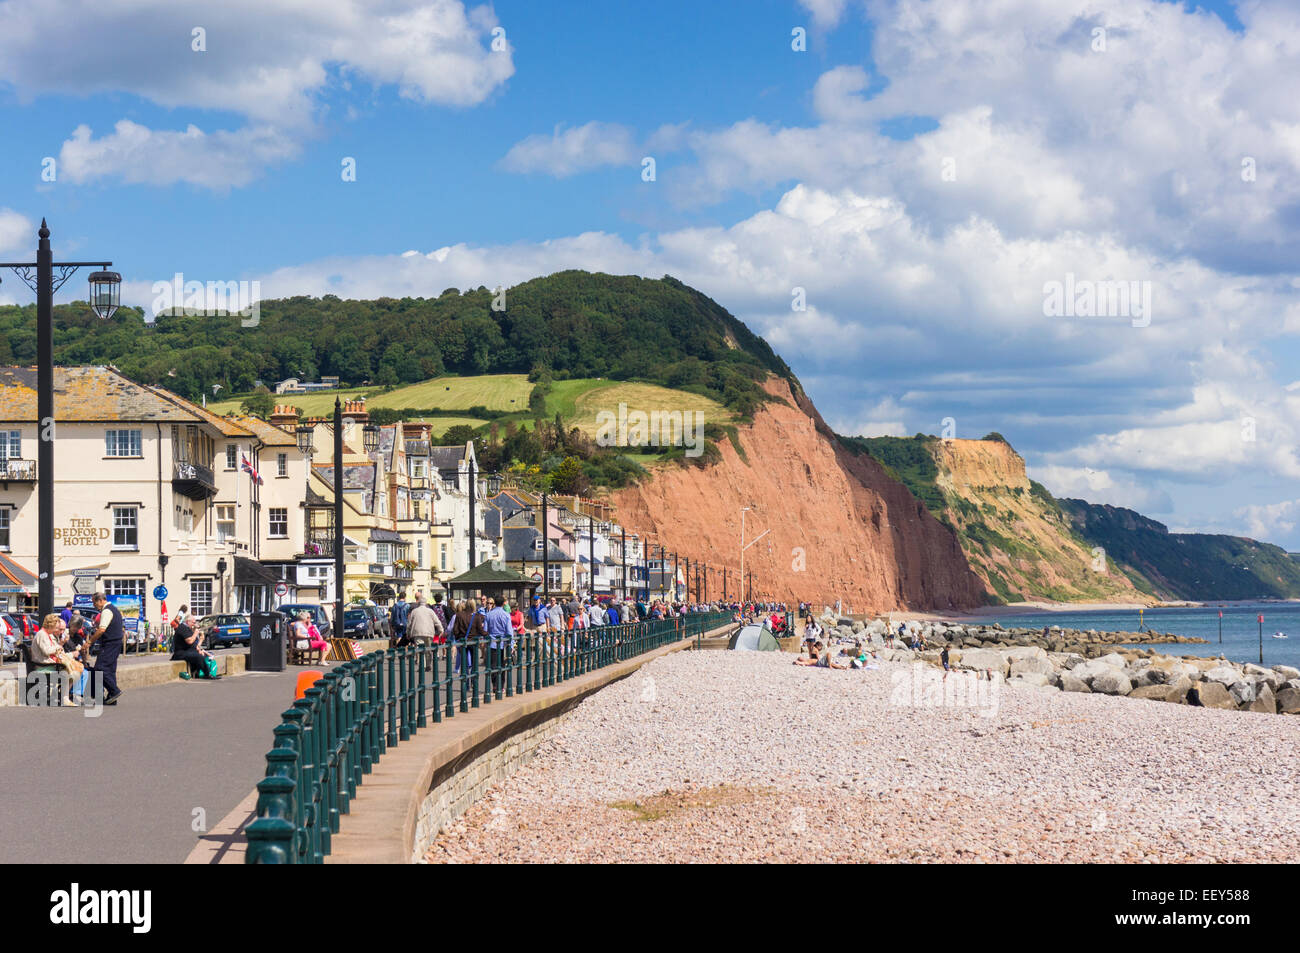 The seafront at Sidmouth, East Devon, England, UK in high summer on the Jurassic Coast Stock Photo